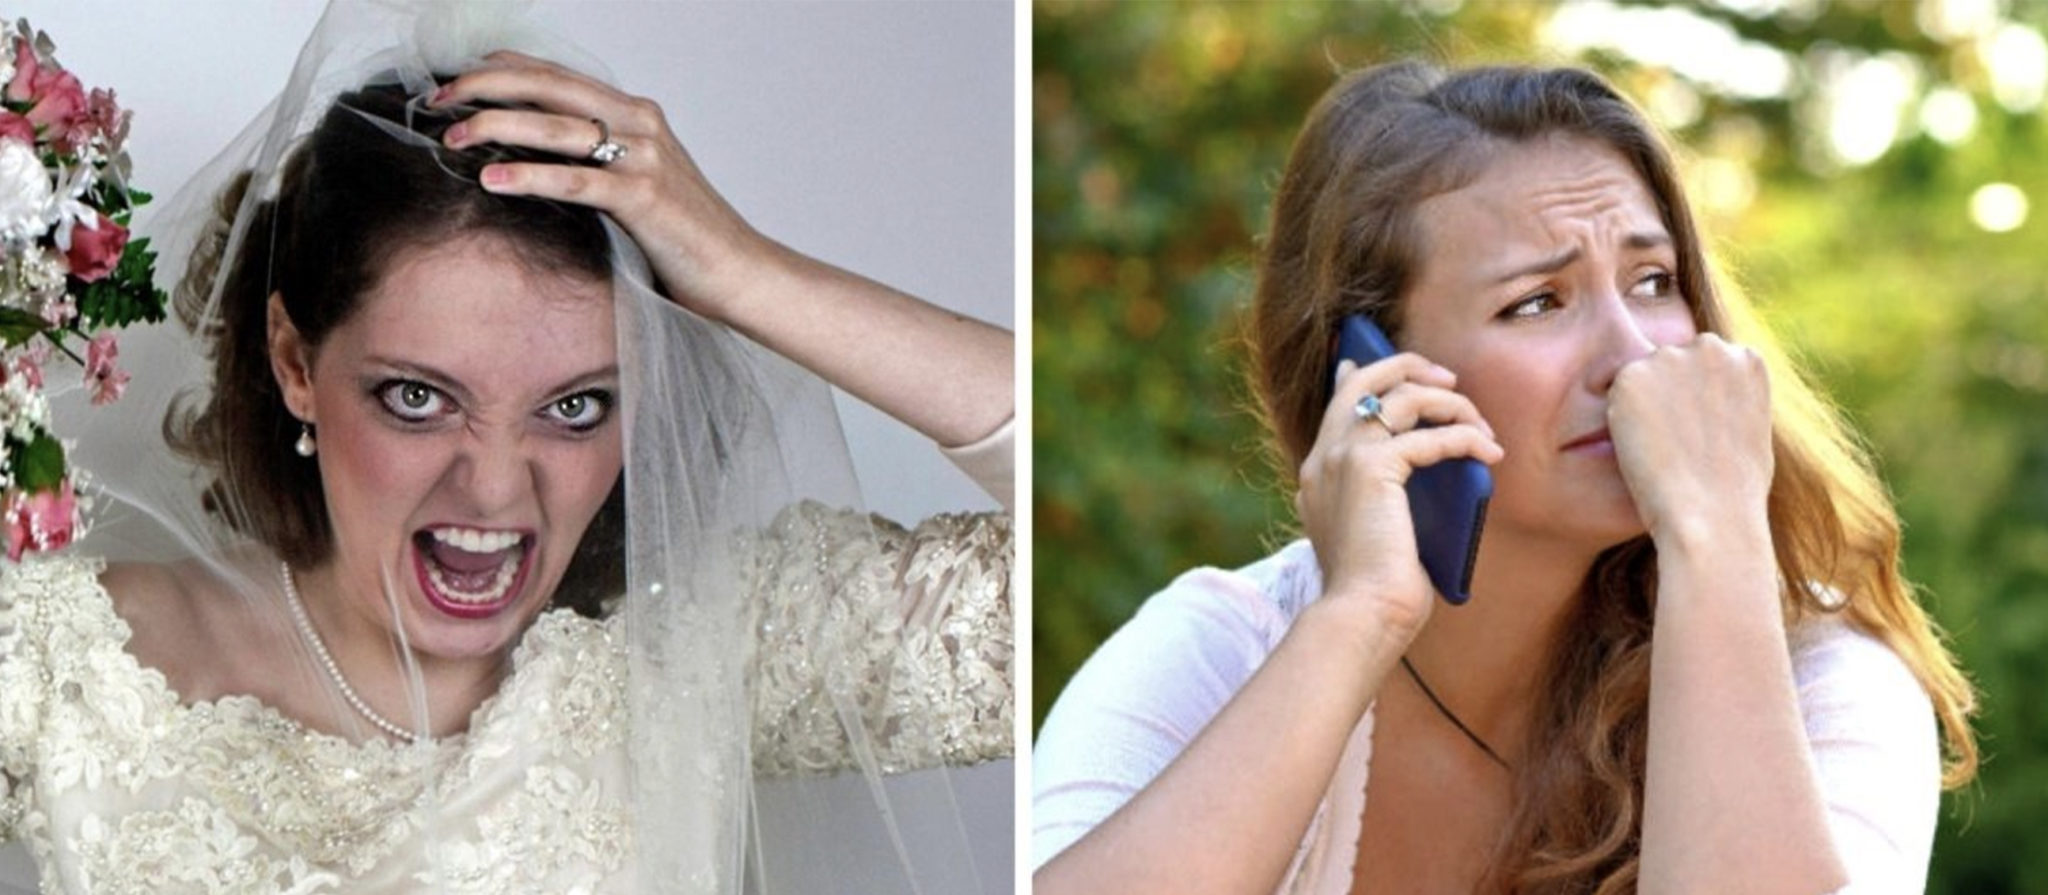 Horrified People Share Stories Of The Worst Brides They’ve Ever Seen